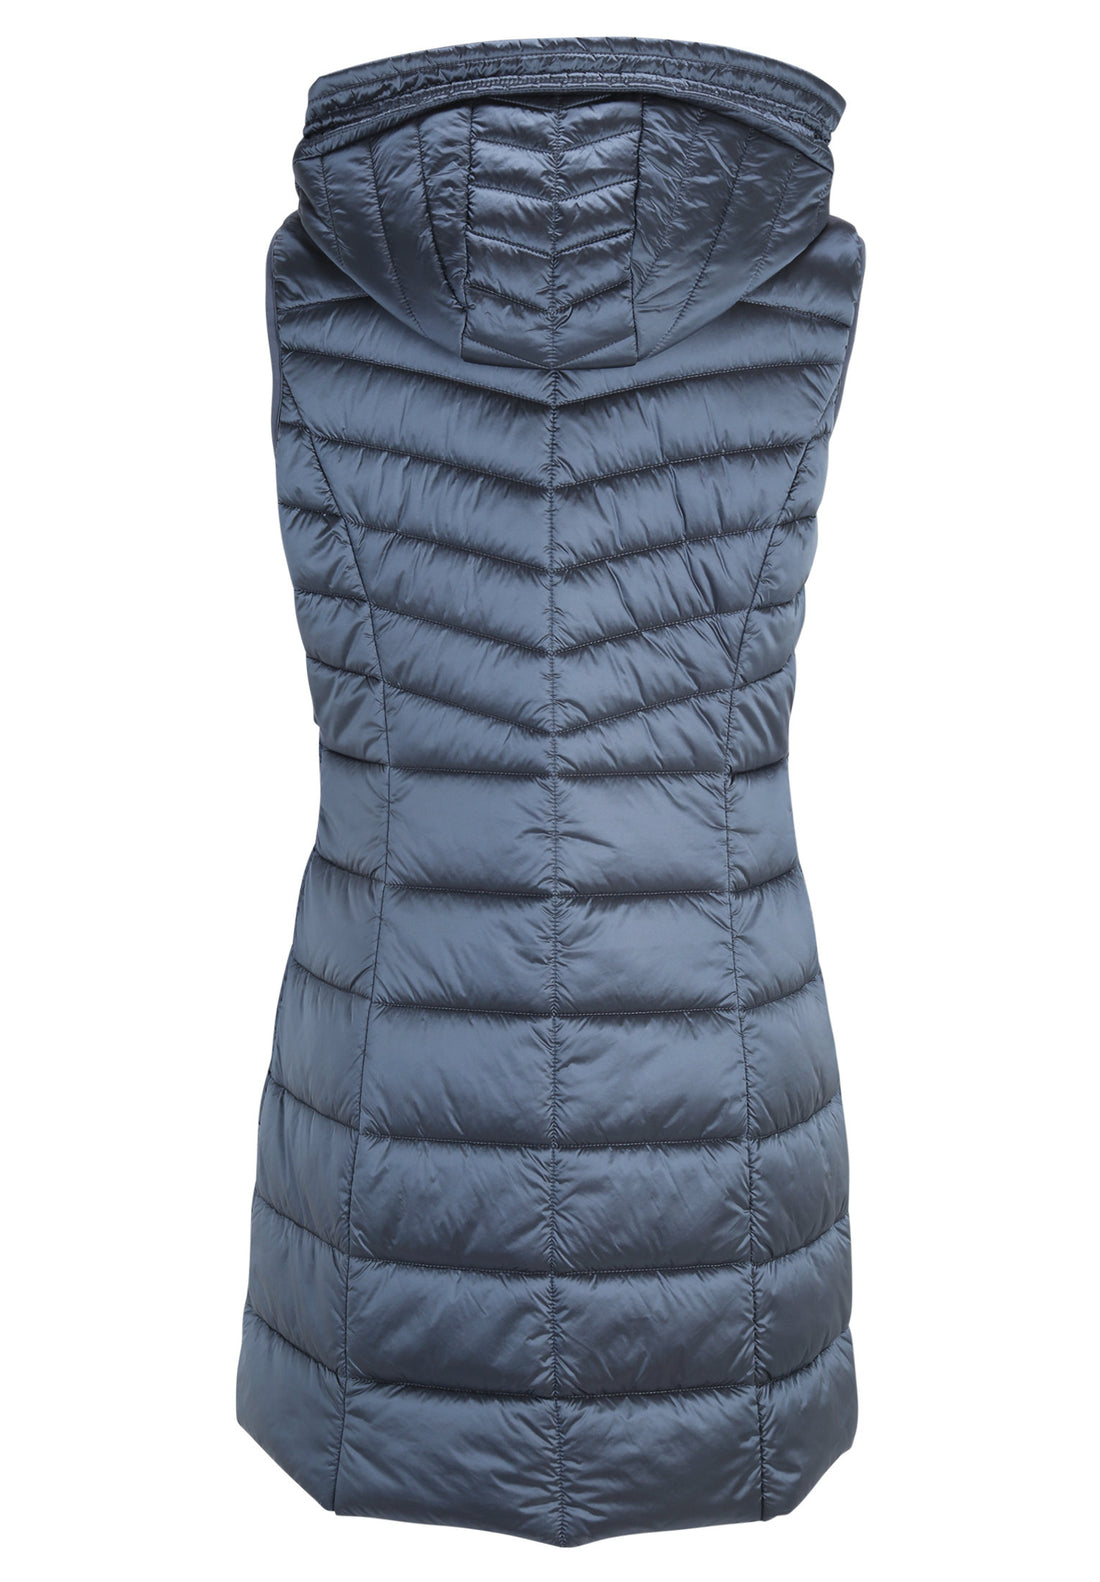 Blue Quilted Puffer Vest With Hood_7542-1537_8398_02